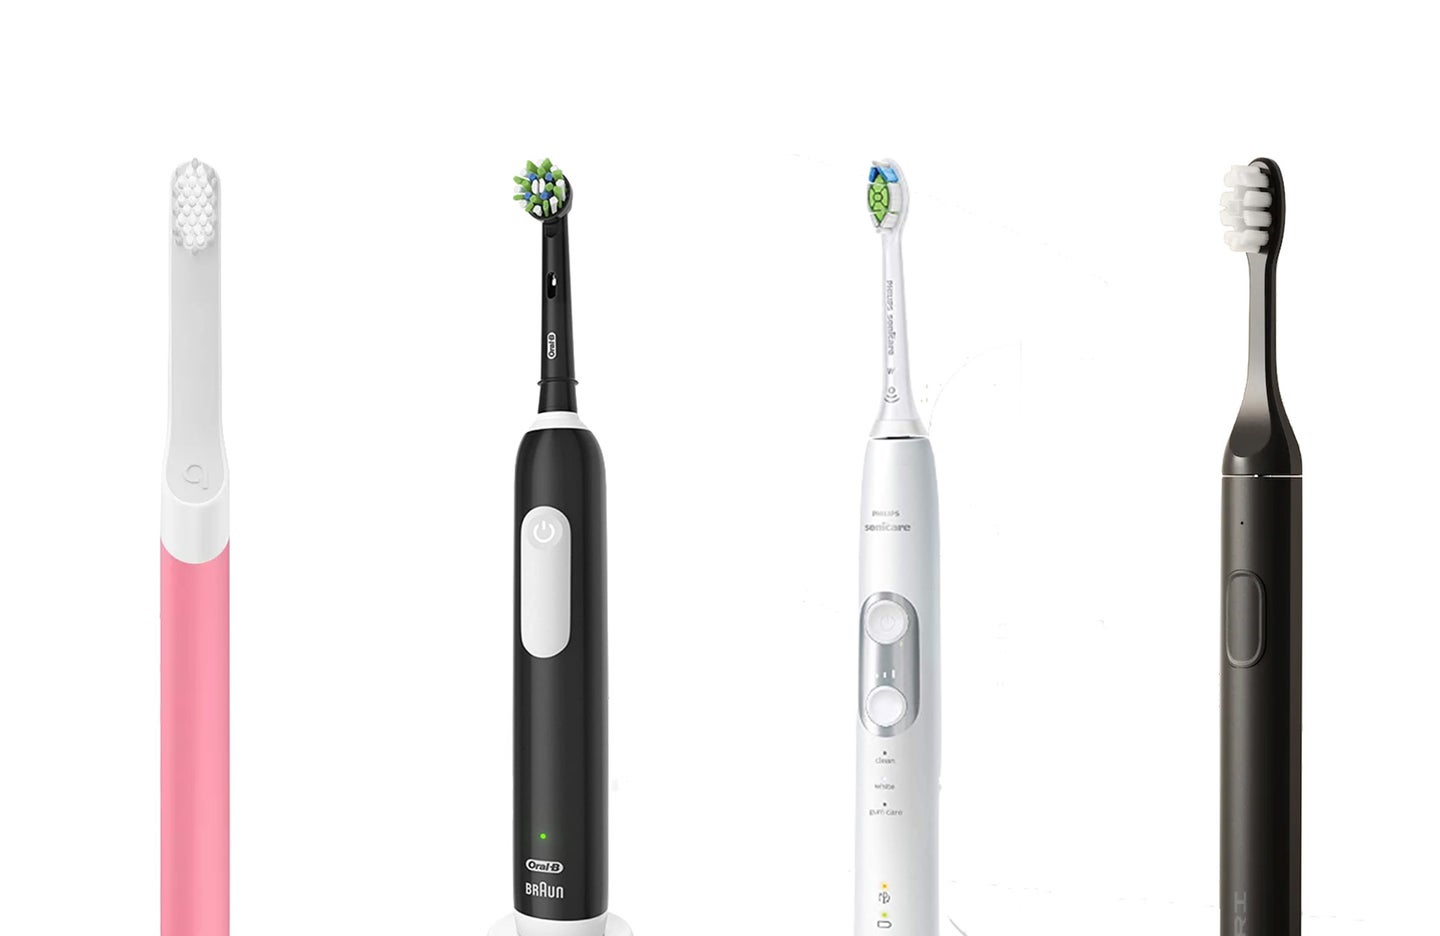 Ramp up your oral hygiene with one of the best electric toothbrushes.